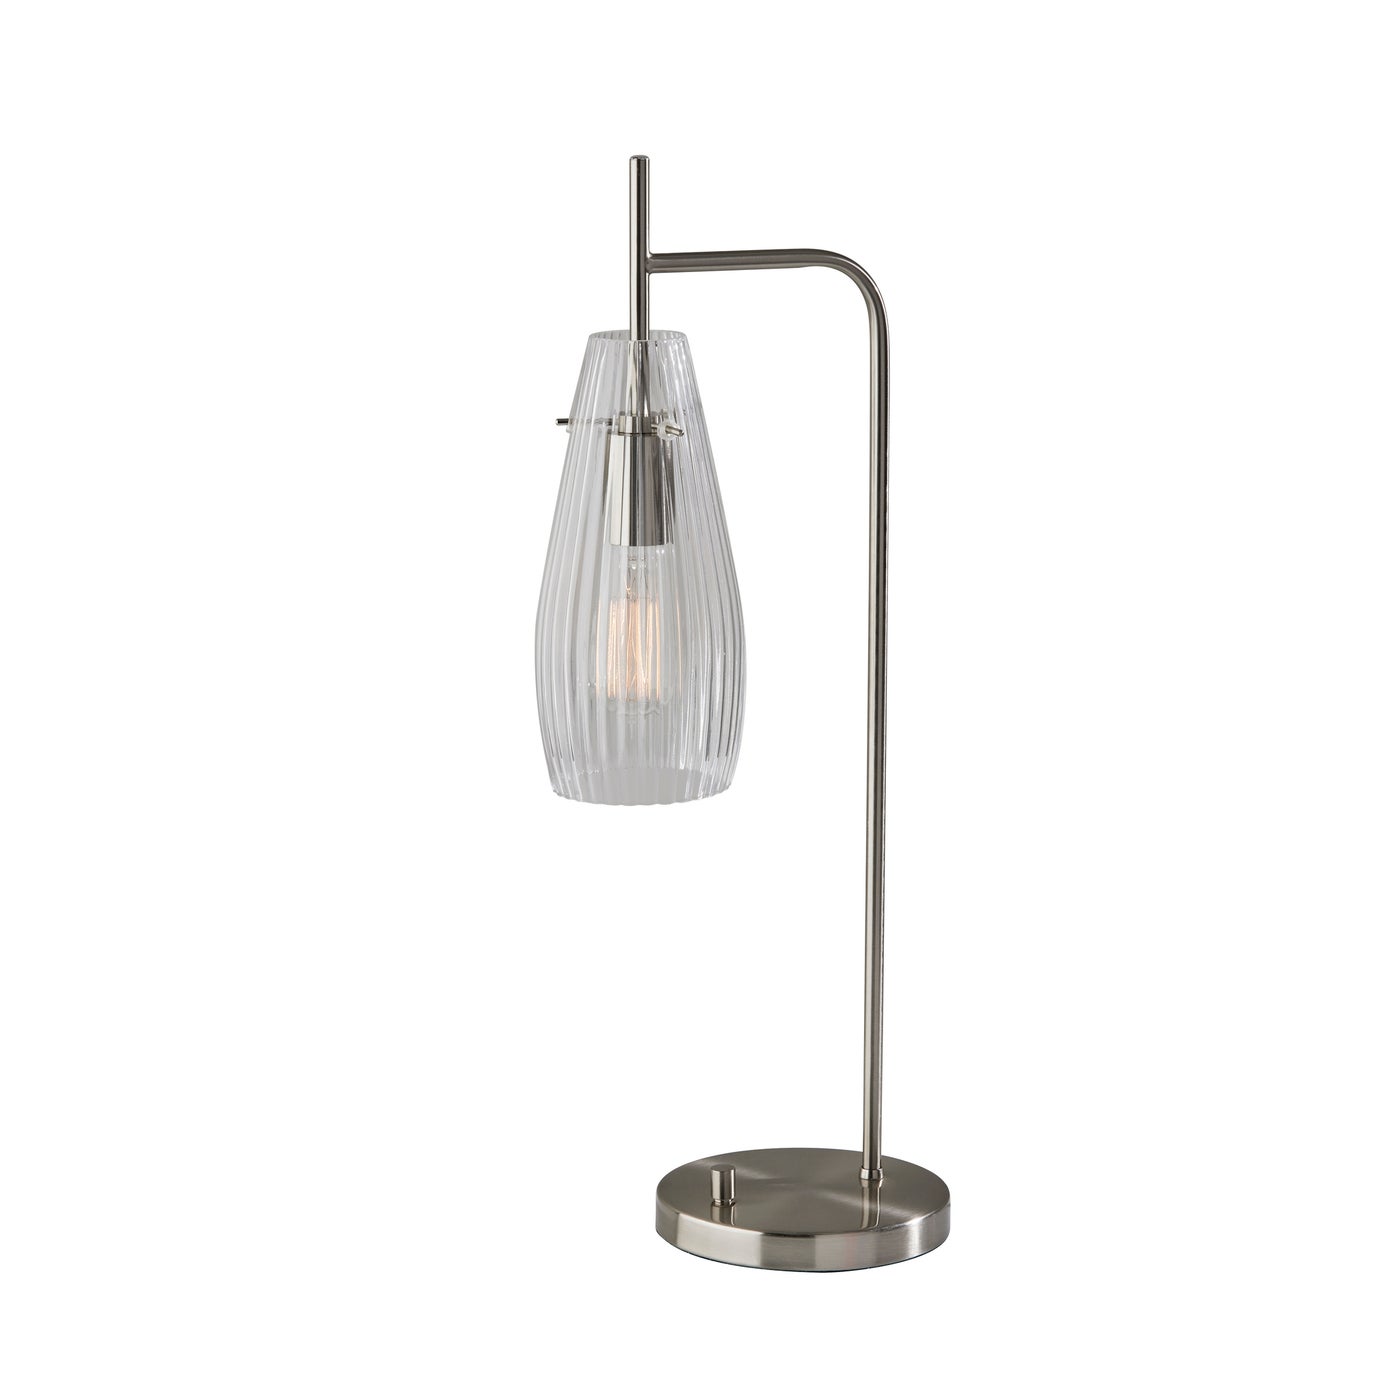 Adesso Home - 2147-22 - Desk Lamp - Layla - Brushed Steel